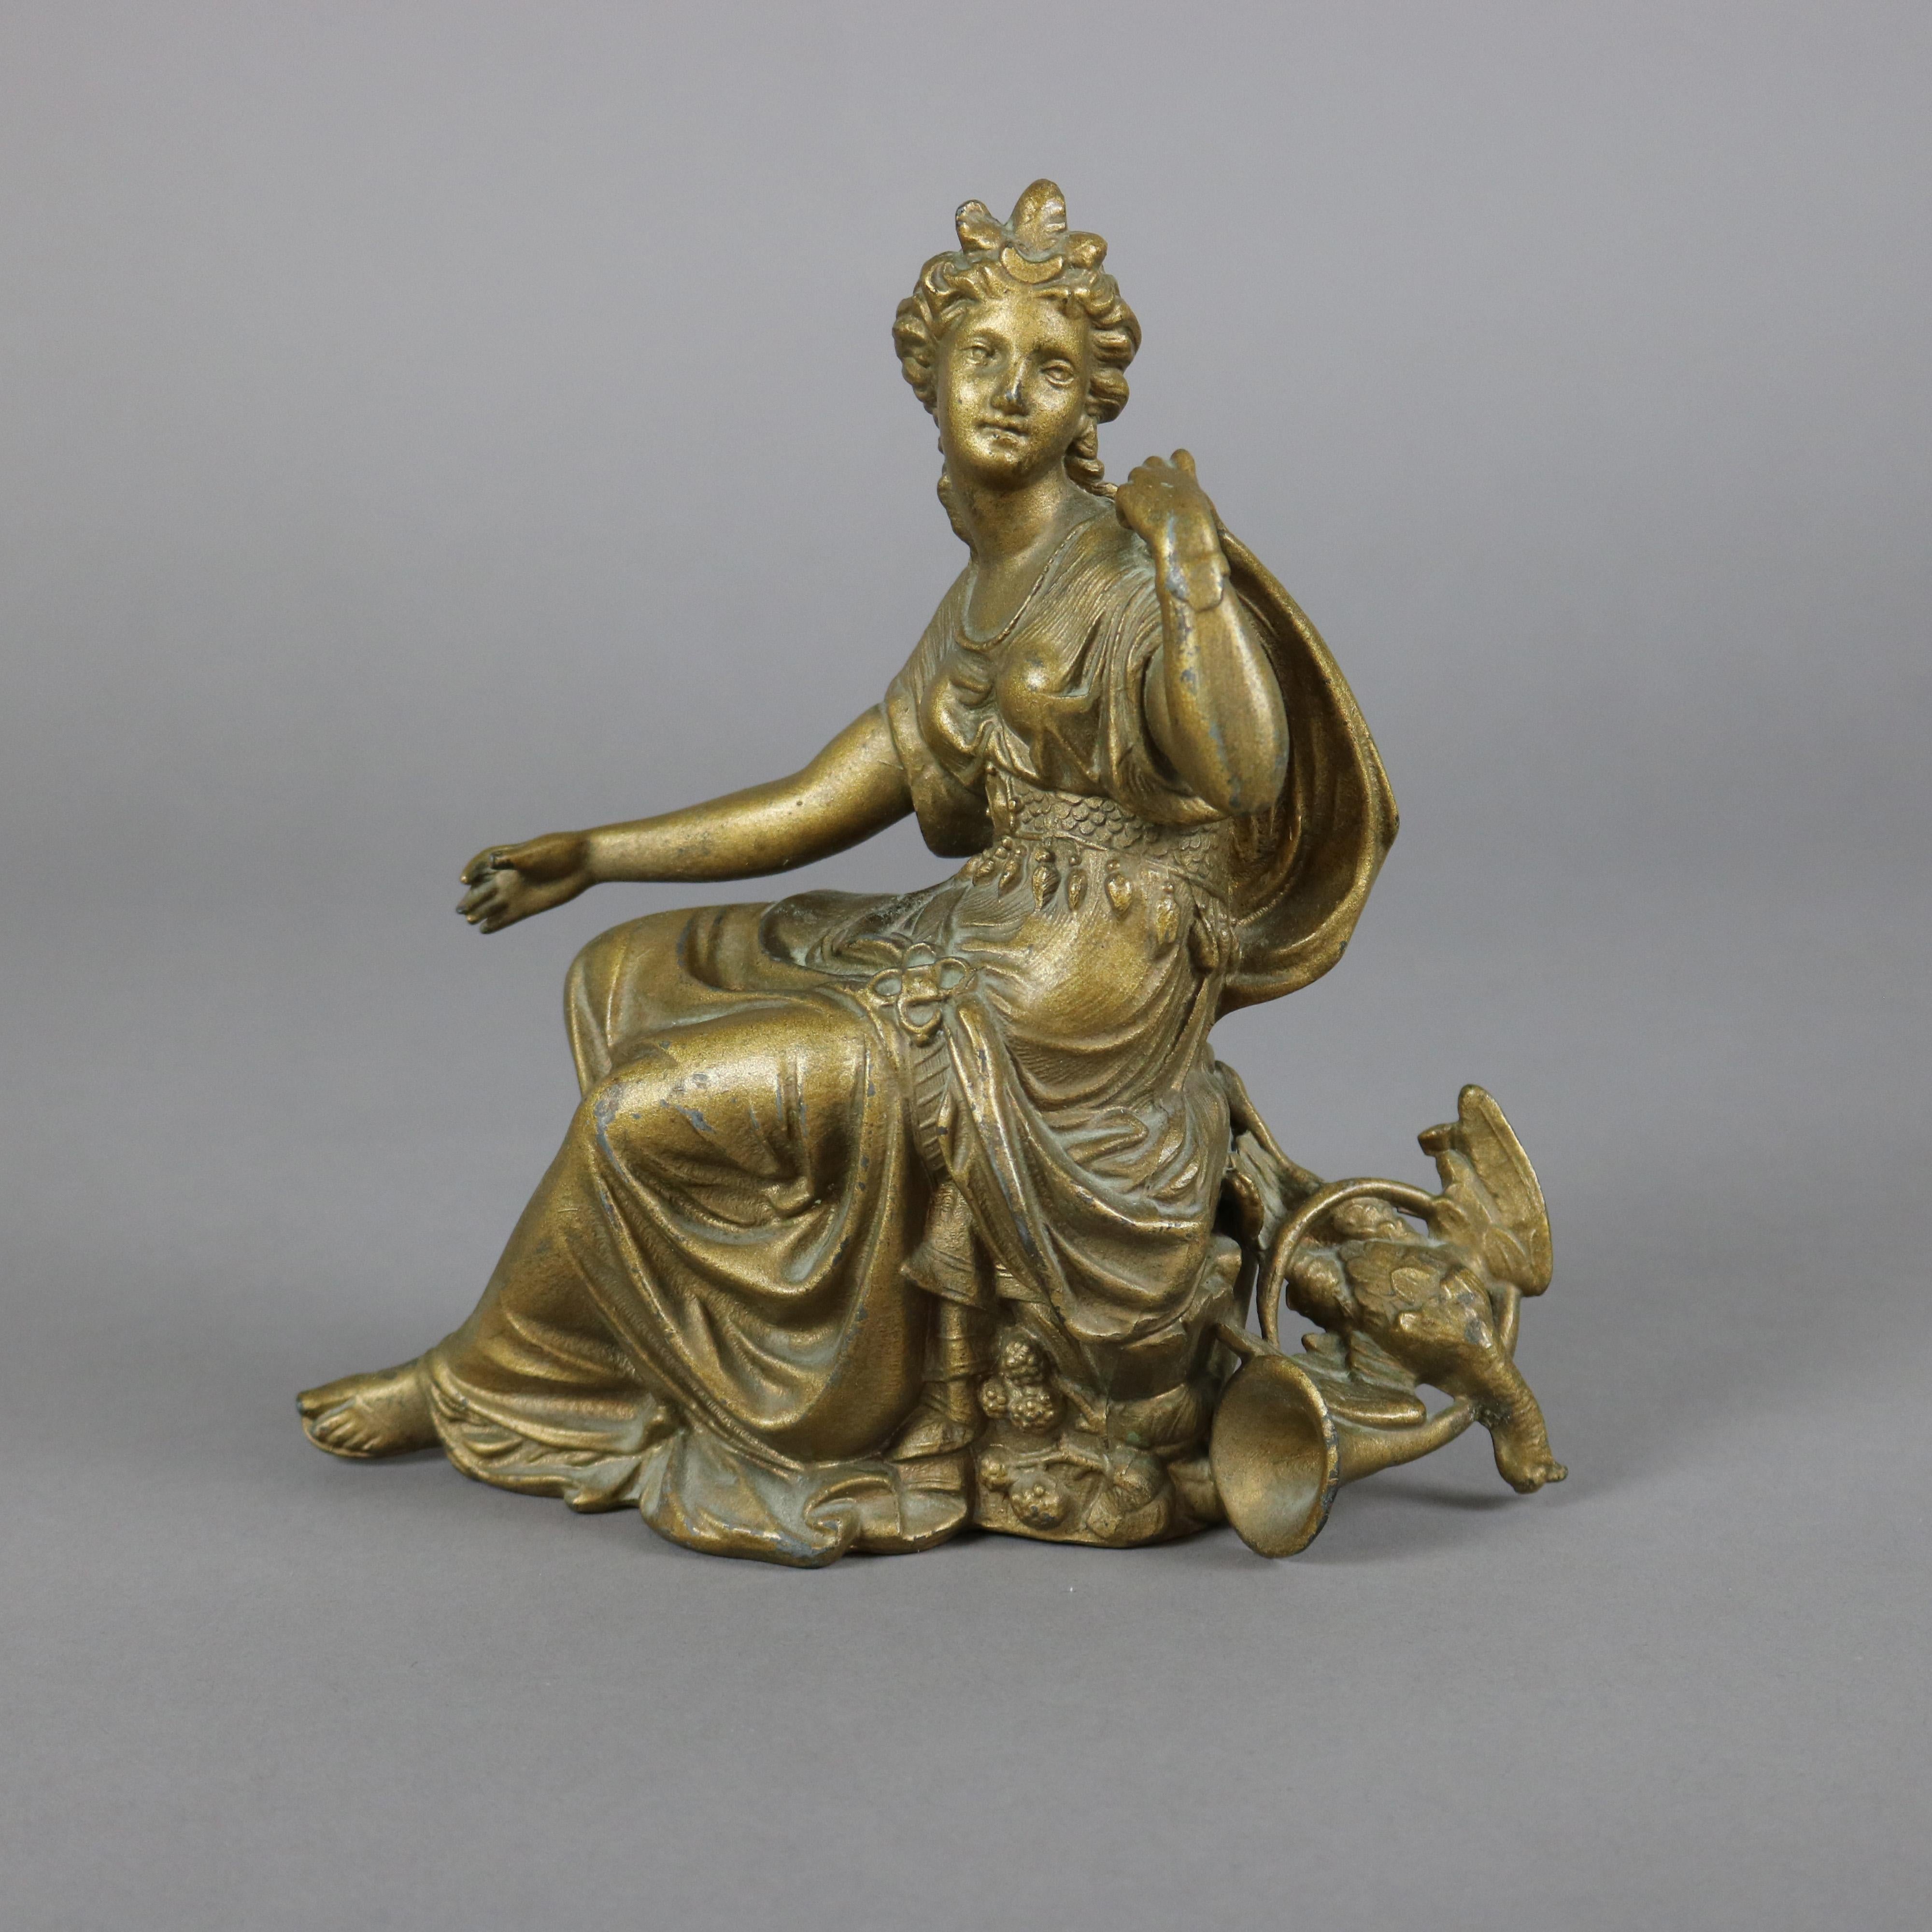 An antique Classical portrait sculpture offers gilt cast metal figure of a Grecian woman with horn and pheasant, c1890

Measures - 8.5''H x 8.25''W x 3.5''D.

Catalogue Note: Ask about DISCOUNTED DELIVERY RATES available to most regions within 1,500